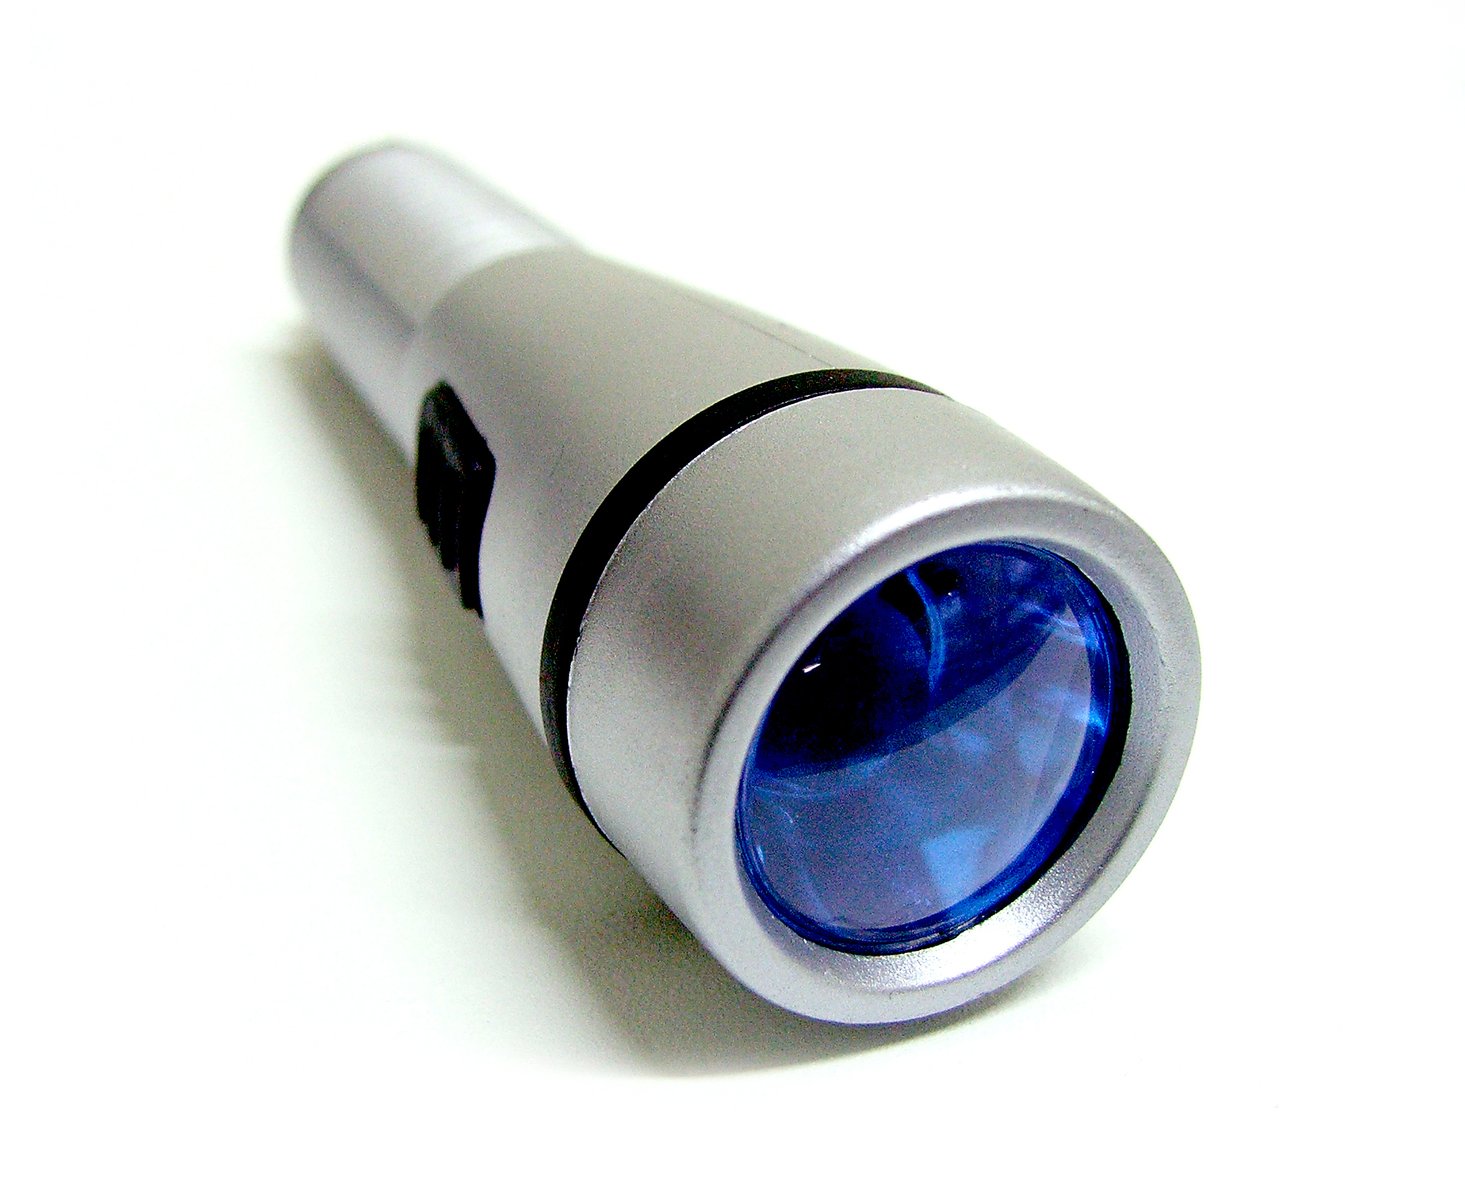 a close up of a flashlight on a white surface